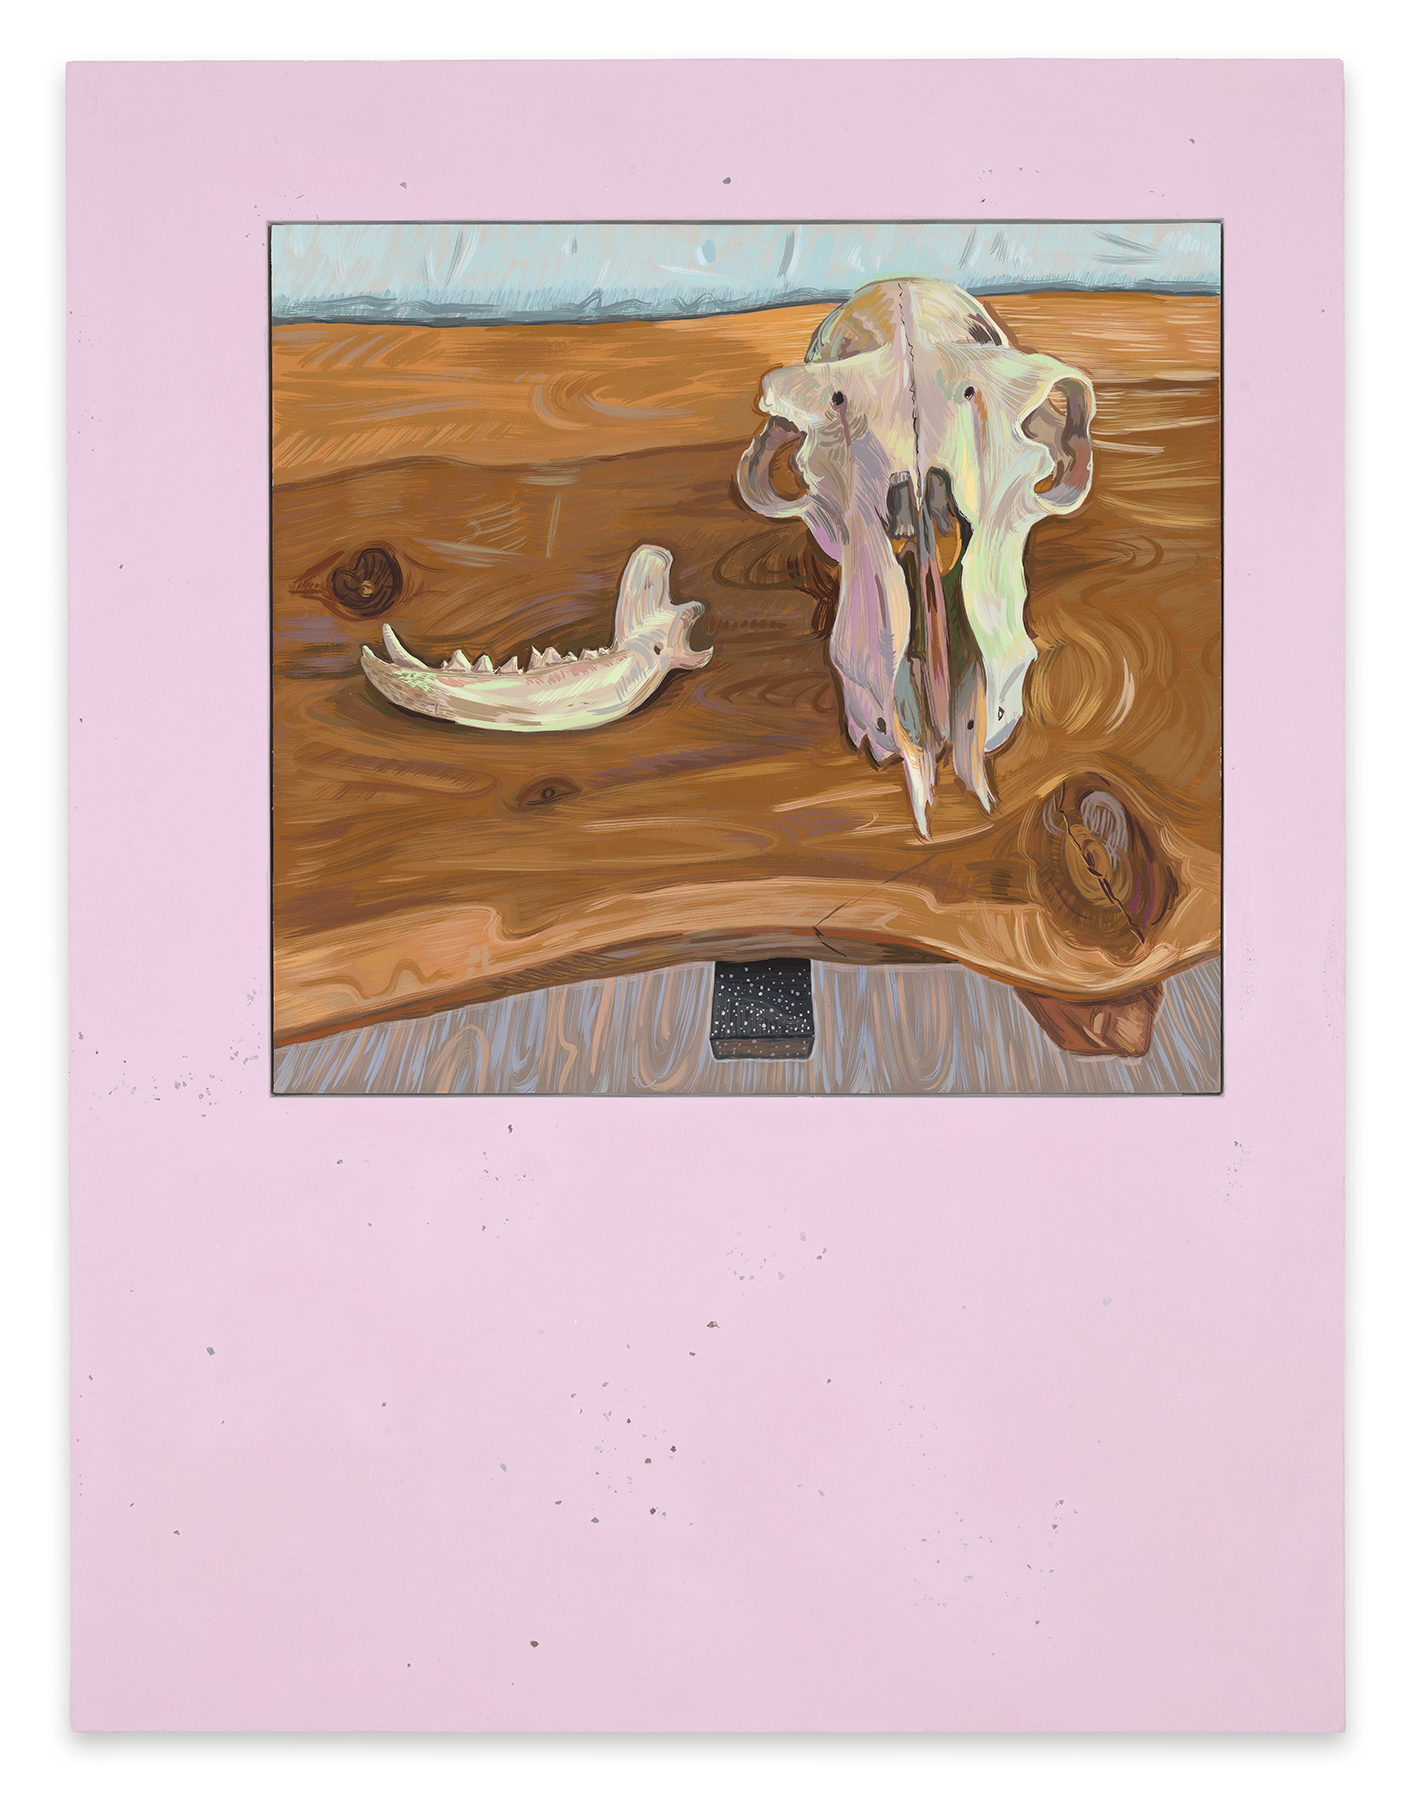 This image shows a painting which is framed in a pigmented pastel pink panel that includes   fragments of earth and rocks from the sites where the paintings were made. Here the painting directs the viewer to look down on a brightly colored still life in O’Keeffe’s studio at Ghost Ranch – a small jaw bone (possibly a coyote) and an animal skull, sitting on curvy pine plank shelf cut from a tree.  The shelf, which is suspended from a metal bracket, is painted in horizonal swirls of brown, beige, purple, yellow, pinks and grays to create the sensation of the wood and knotty pine. The rendering of horizontal curvy wooden shelf and the skulls consume the picture plane creating a sense of flatness and three-dimensionality. The floor below, is painted in vertical and u-shaped lines of pastel brown, beige, peach, gray and blue to give the illusion of depth between the shelf and the floor. Gestural linear strokes and squiggles in pastel pinks, purples, grays, greens, yellows, blues, browns and cream create the dimensionality of form as well as casting highlights on the beautiful simplicity of this skull and jawbone.  The top of the pine plank meets a section of the wall painted in pastel blues, grays, creams and peach colors.